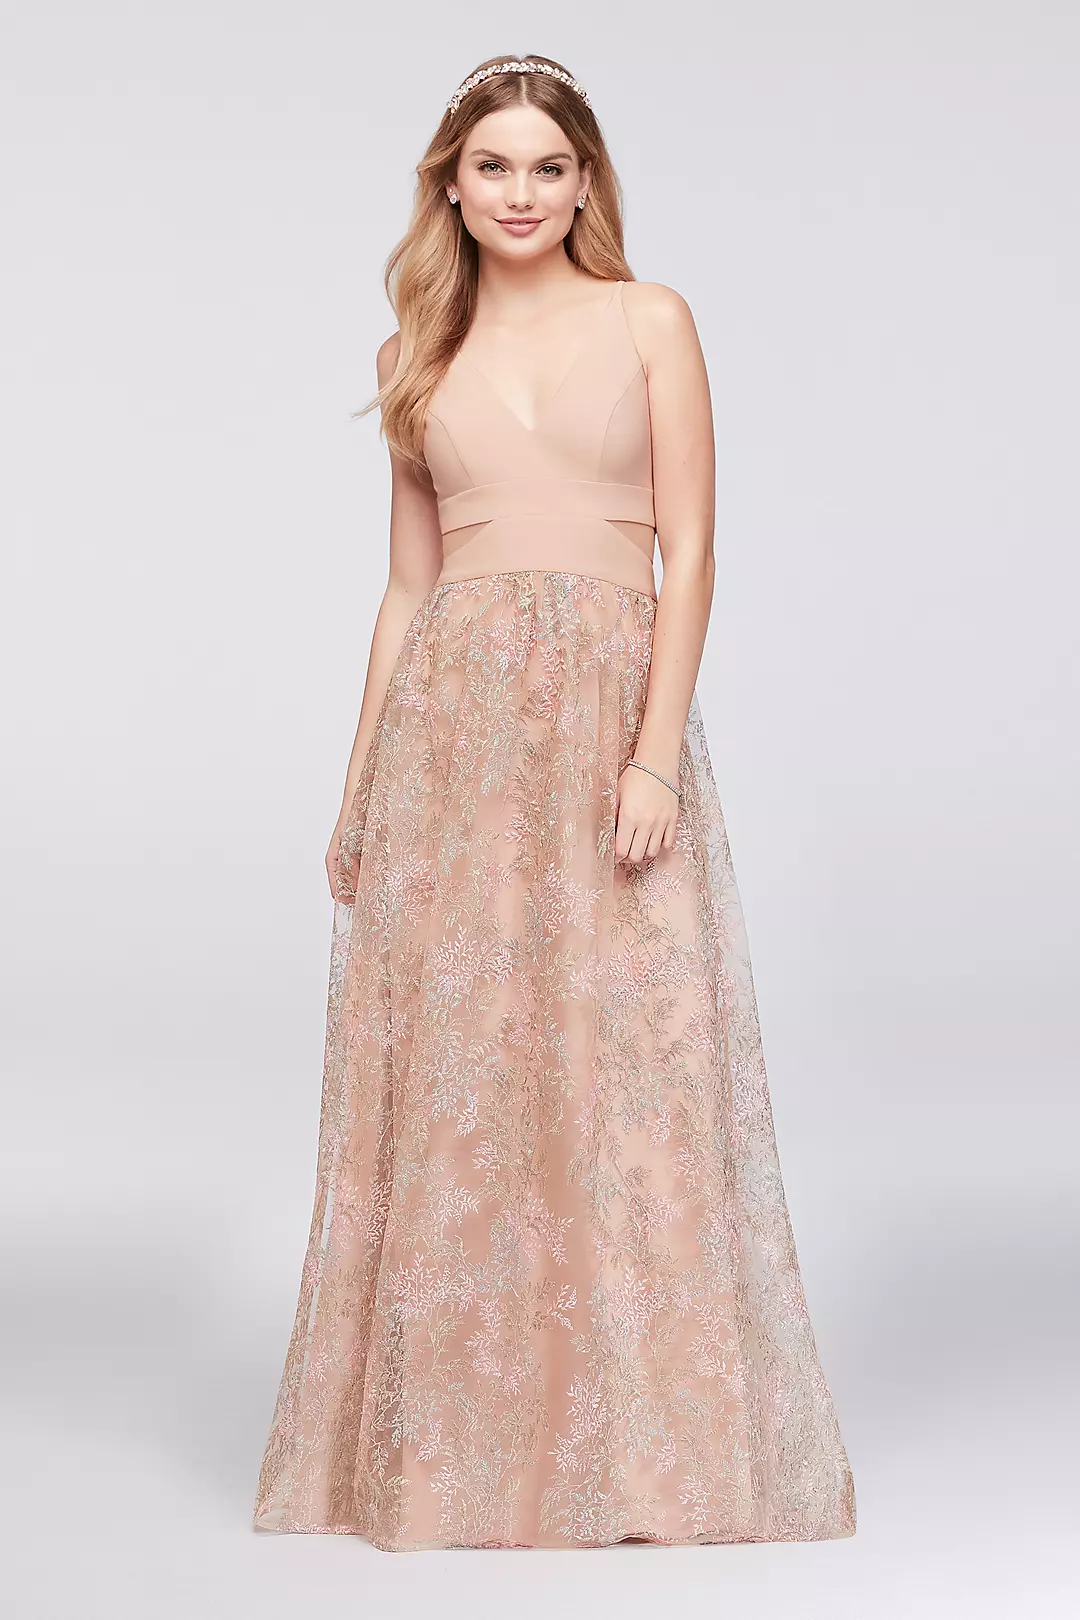 Jersey Ball Gown with Embroidered Mesh Skirt Image